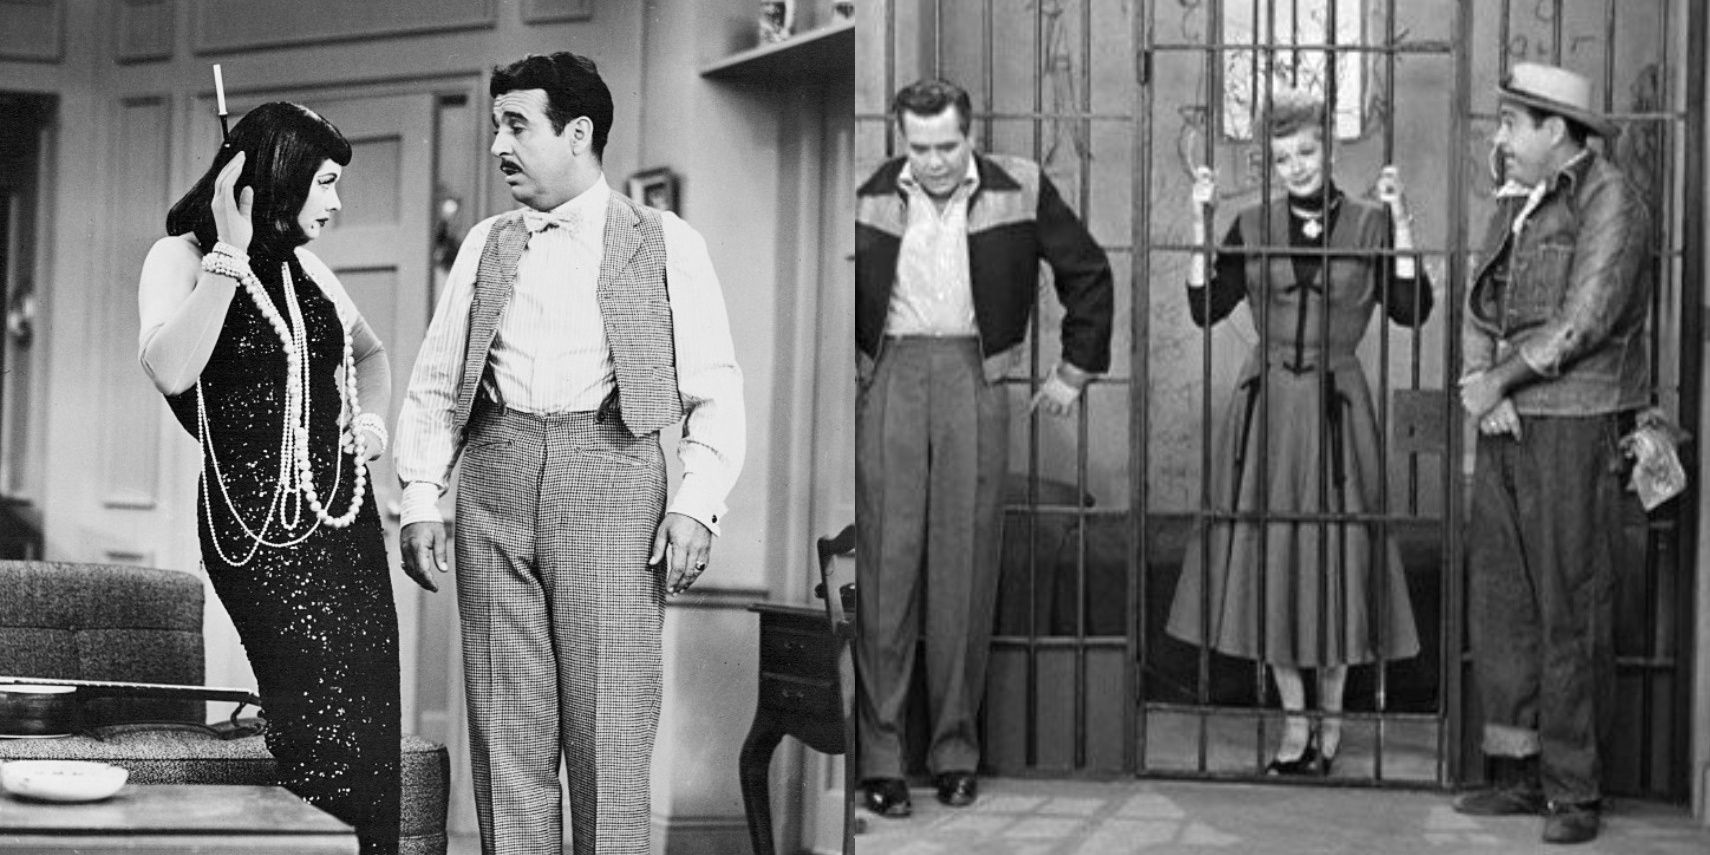 Lucy Ricardo (Lucille Ball) and Tennessee Ernie Ford; Lucy Ricardo in jail with Ricky Ricardo (Desi Arnaz) and Tennessee Ernie Ford in &quot;I Love Lucy.&quot;